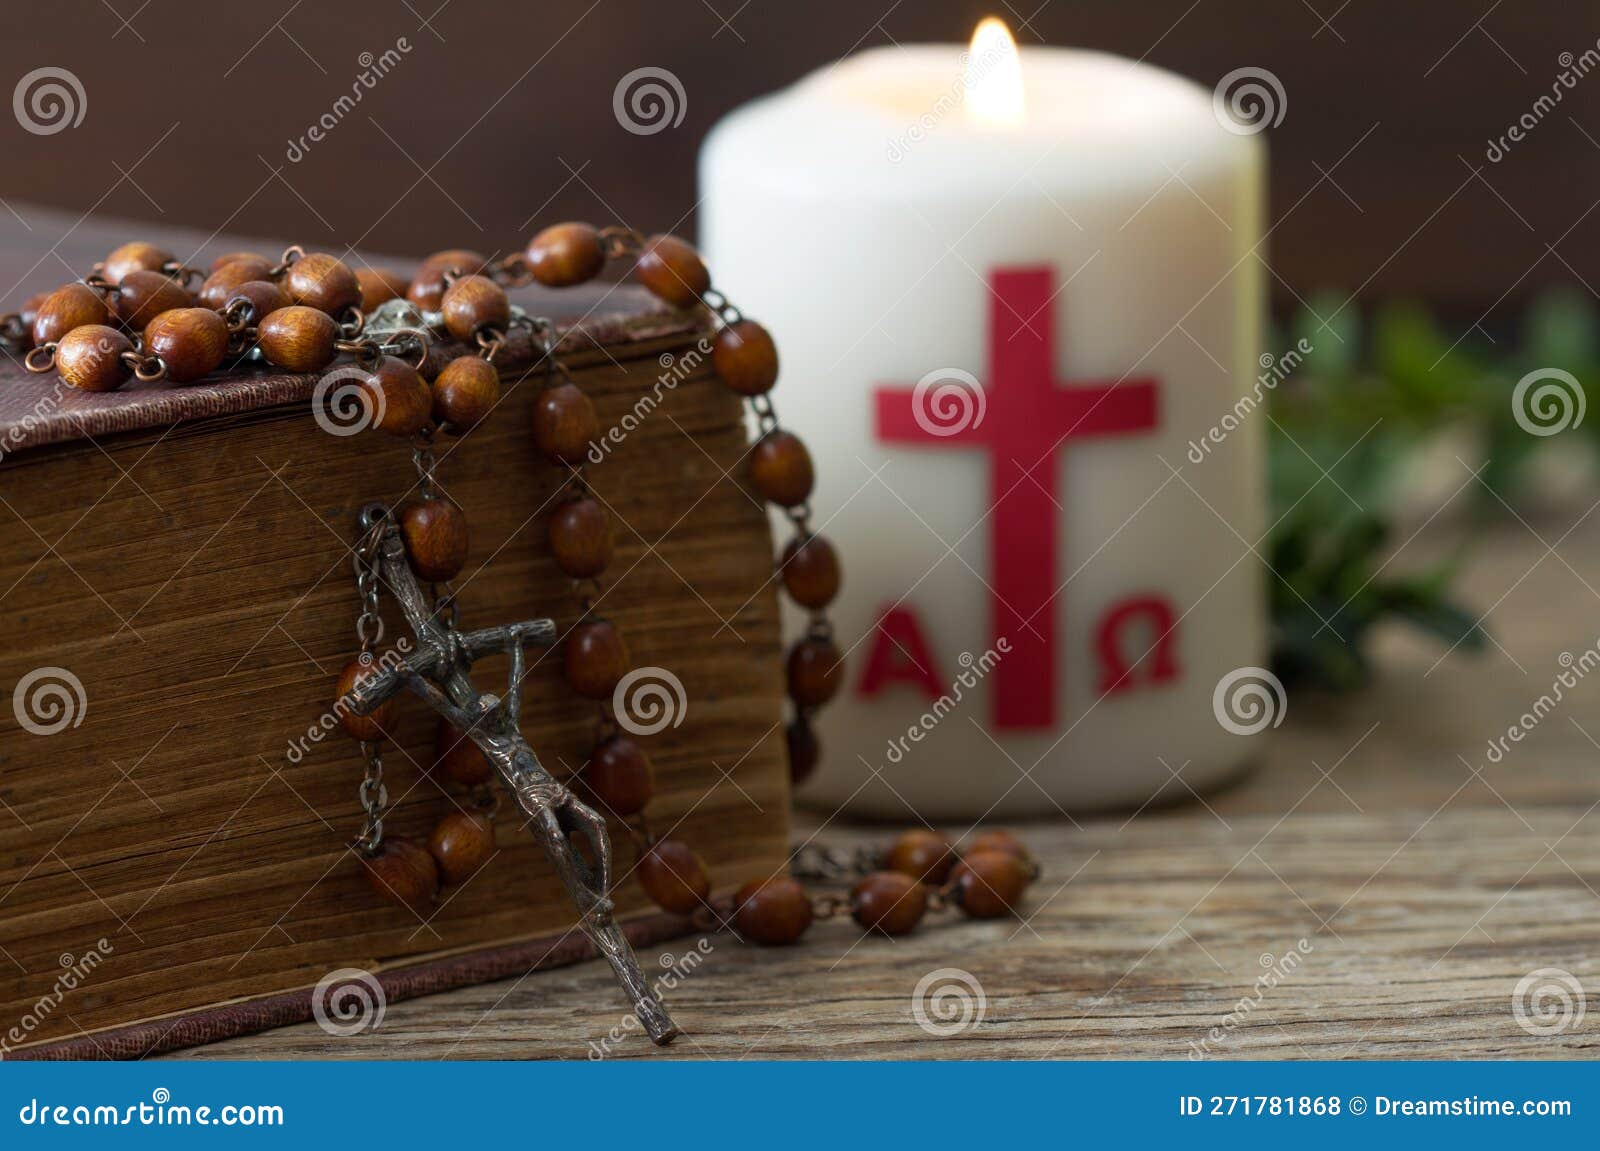 wooden cross with bible, rosary and paschal candle, easter religious concept